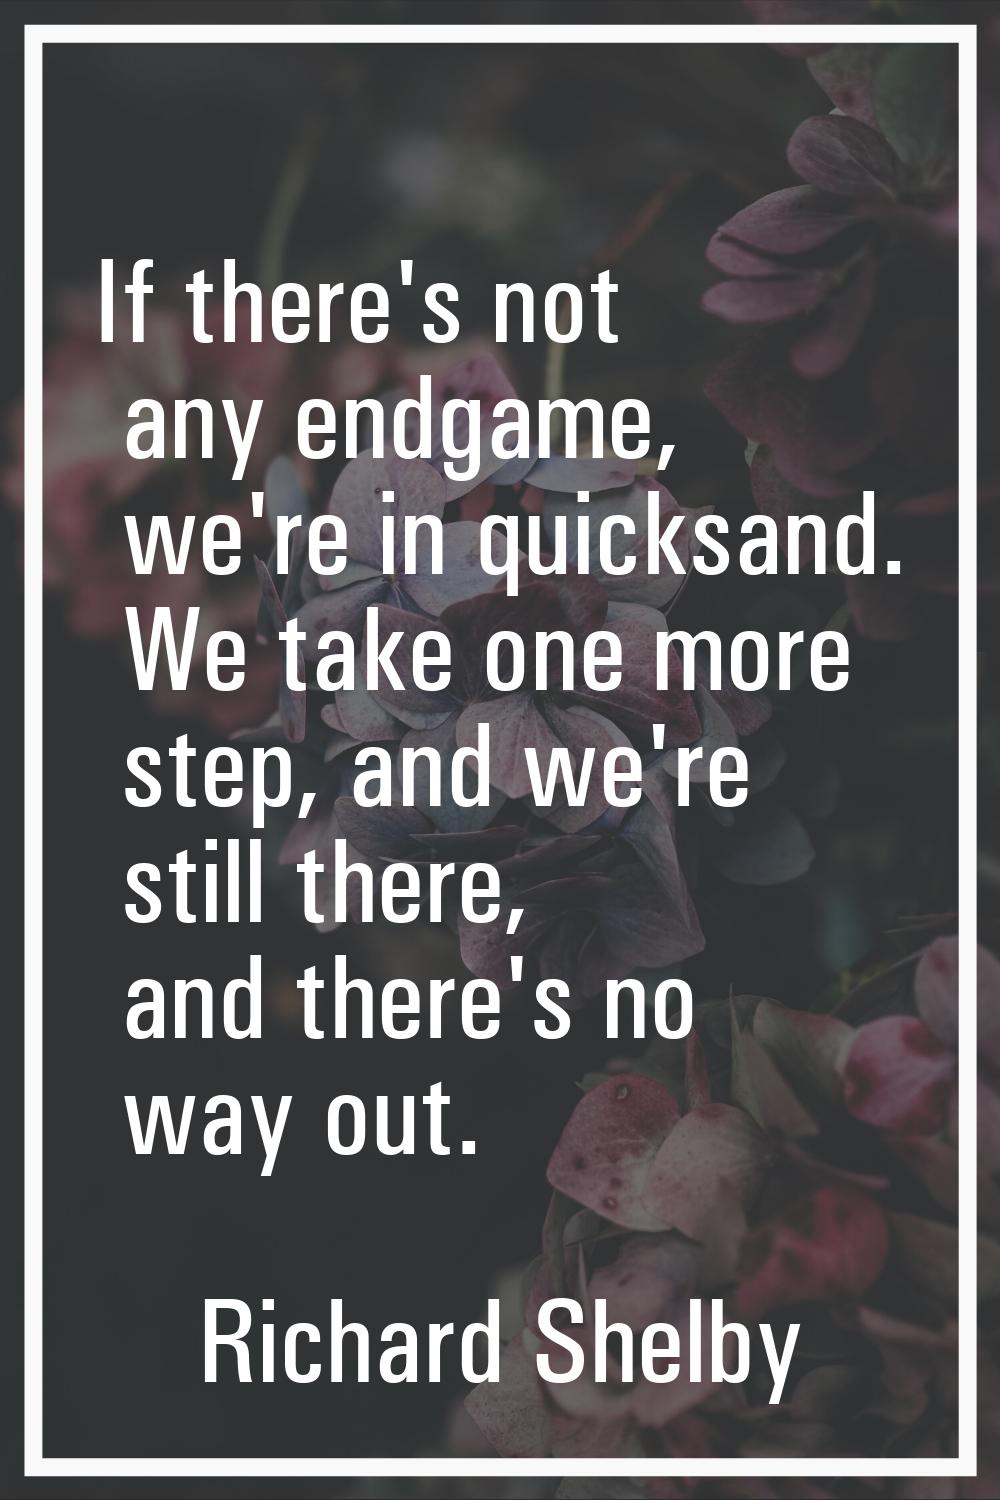 If there's not any endgame, we're in quicksand. We take one more step, and we're still there, and t